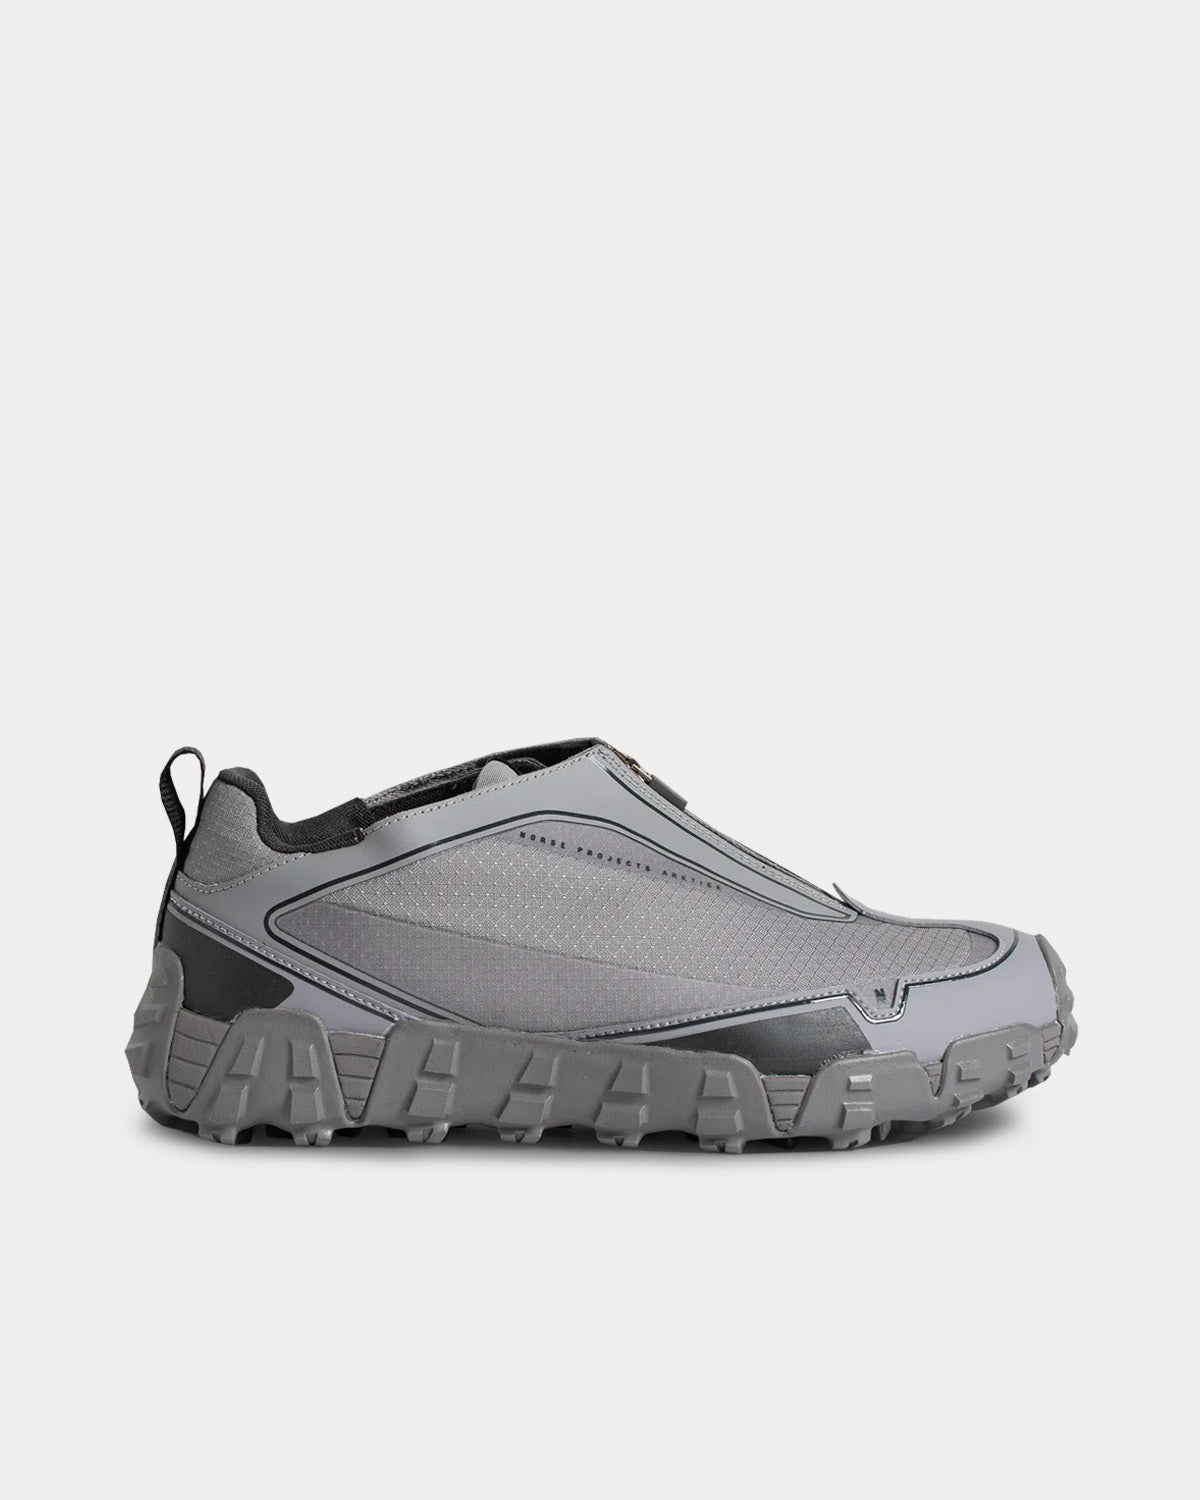 Norse Projects - ARKTISK Zip Up Runner Glacier Grey Running Shoes